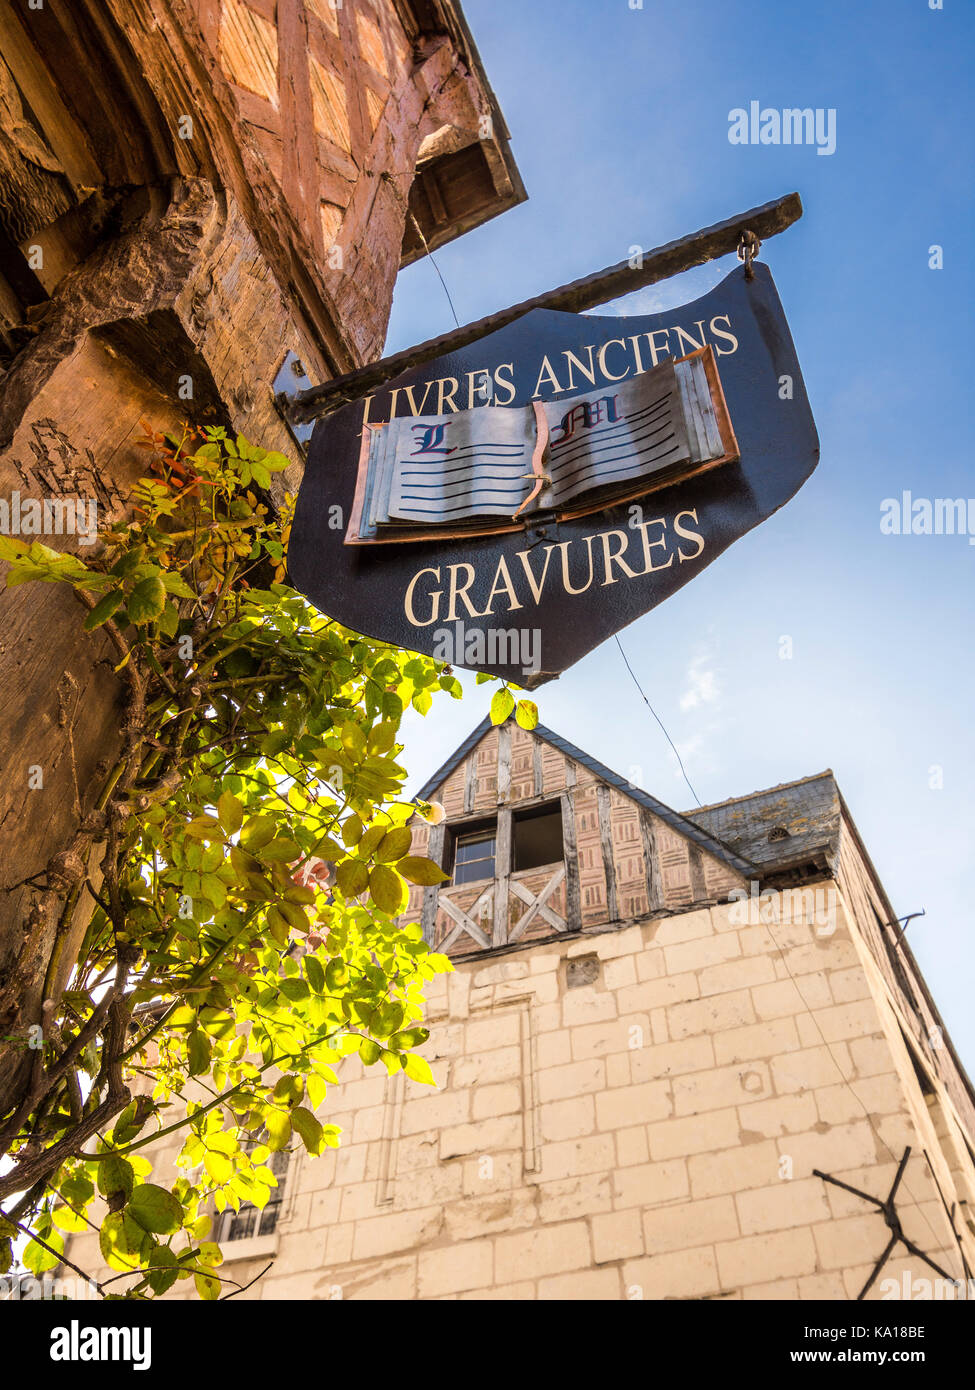 Hanging shop sign for old books and engravings - Chinon, France. Stock Photo